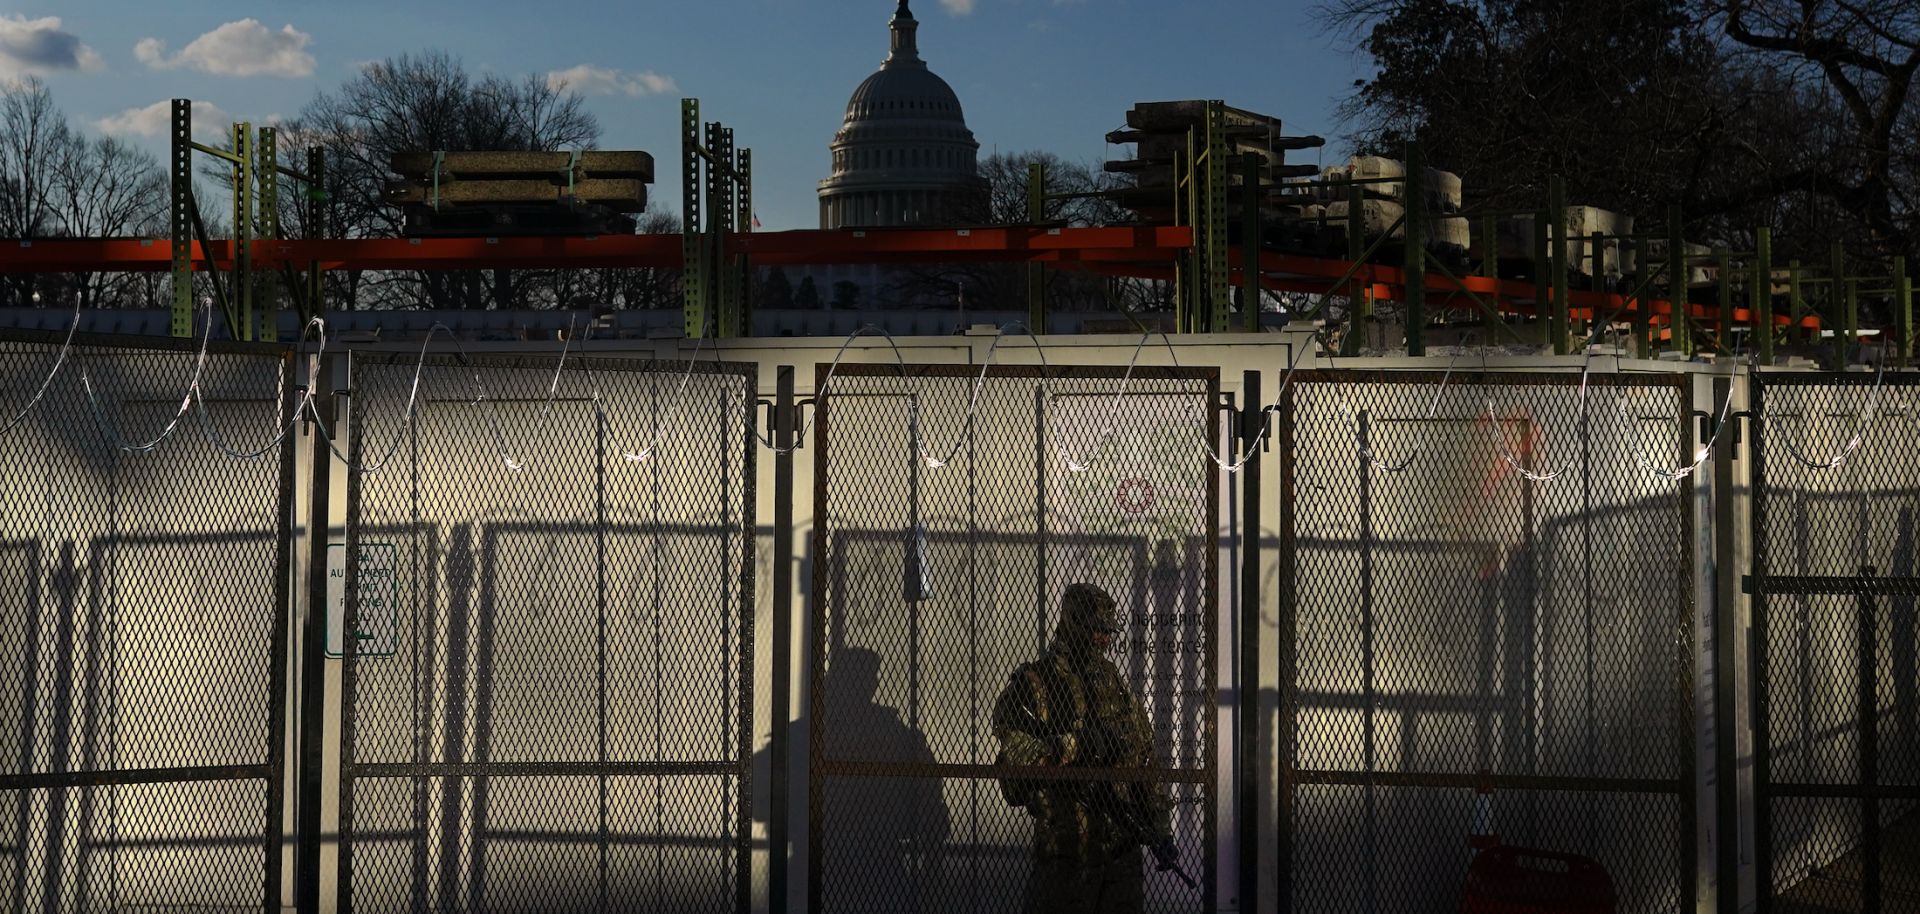 A National Guardsman monitors a security checkpoint near the U.S. Capitol on Jan. 20, 2021, in Washington.